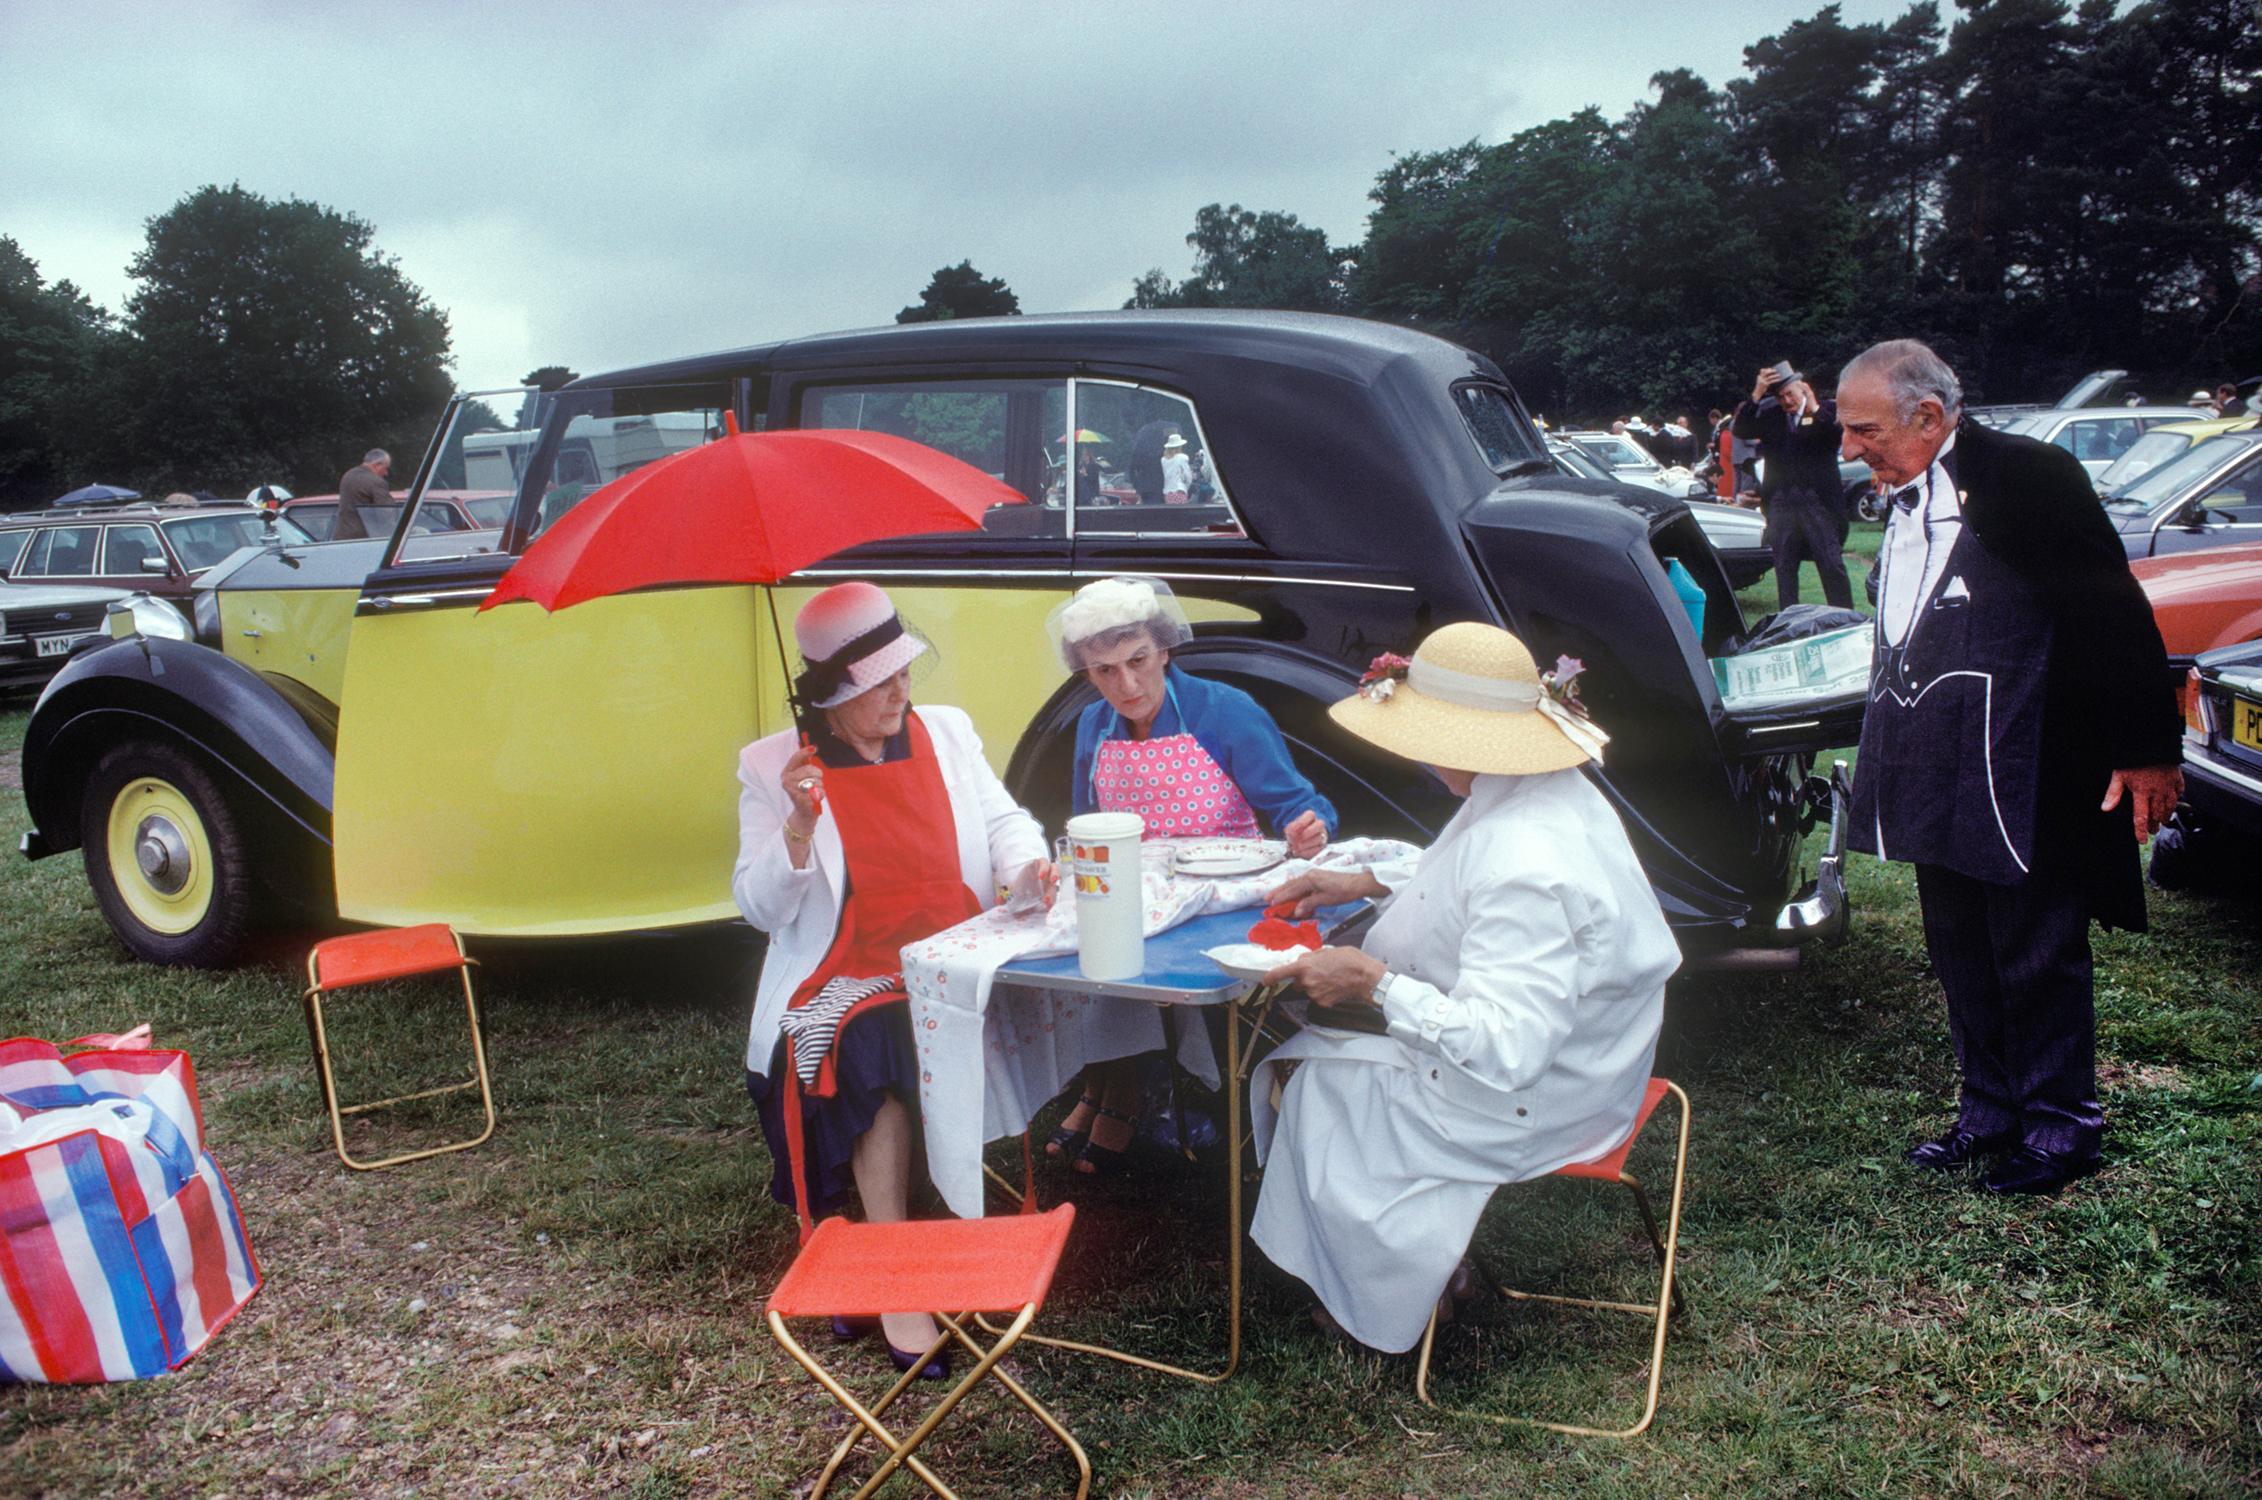 print　Park　cafe　limited　Homer　Ascot　signed　at　England　Sykes　Picnic　hudson　Royal　car,　Car　paume　1stDibs　For　oversized　edition　Sale　sykes　hastings　on